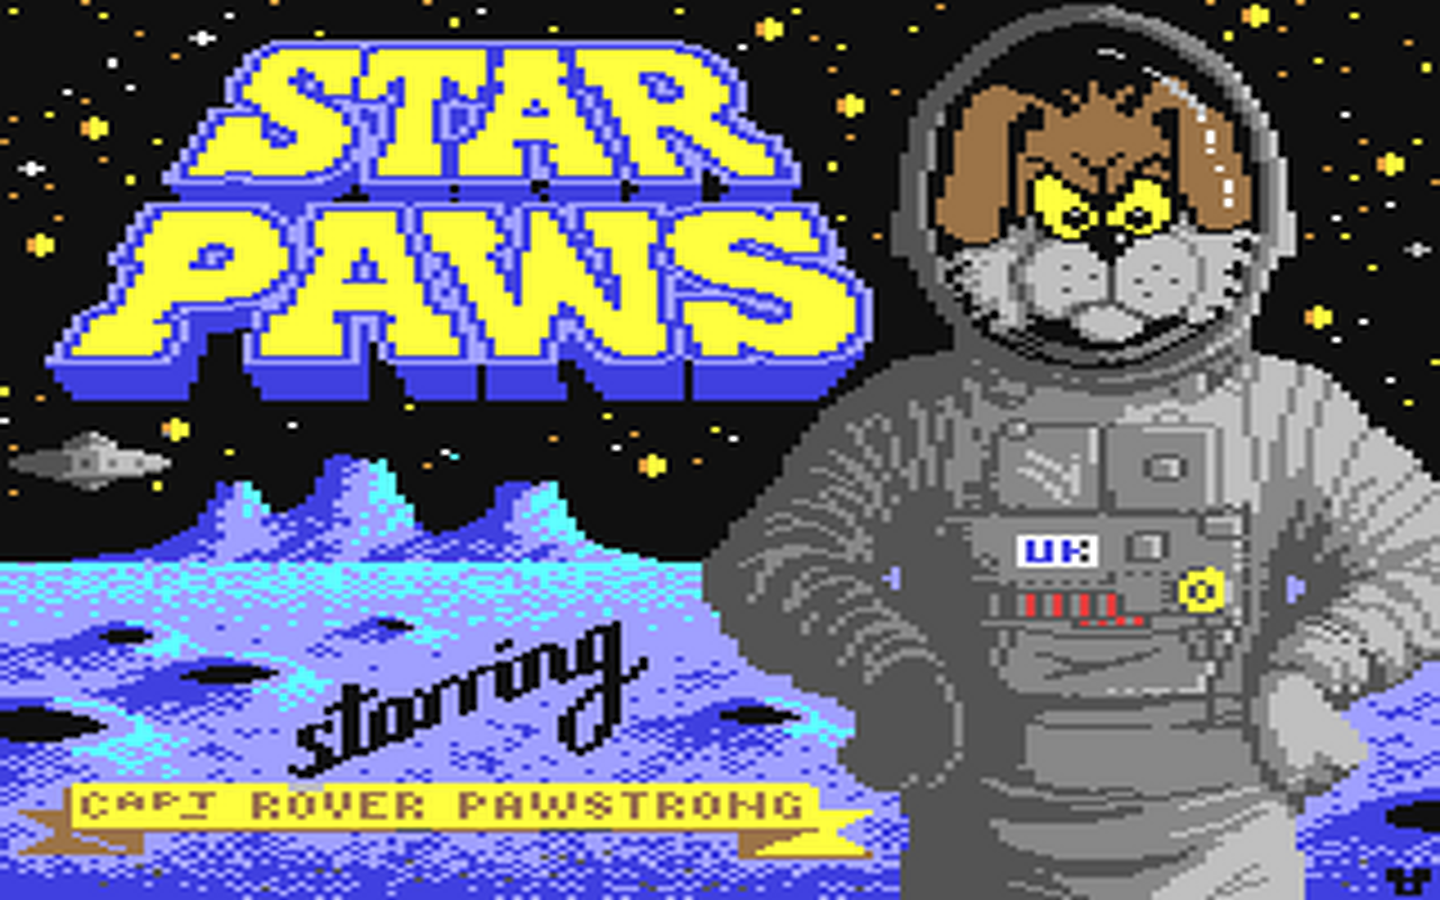 C64 GameBase Star_Paws Software_Projects_Ltd. 1987